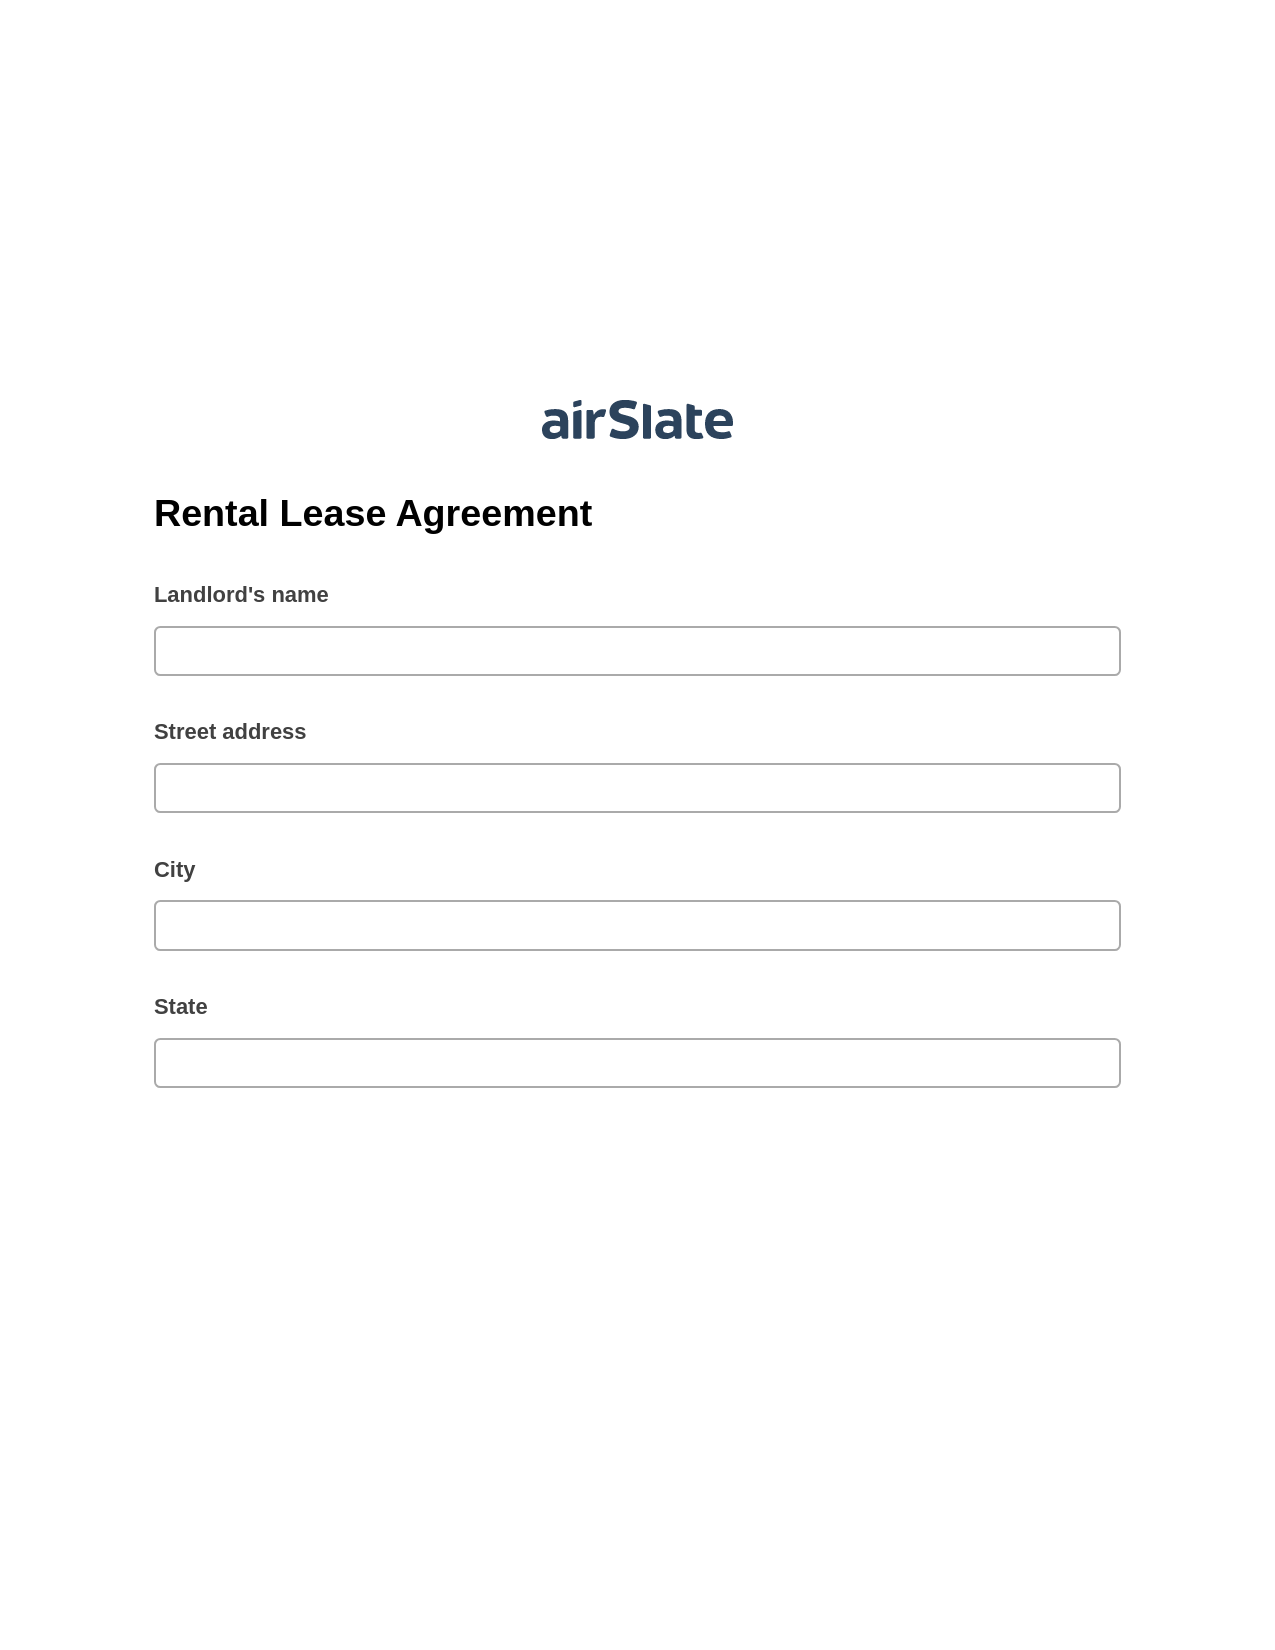 Rental Lease Agreement Pre-fill from Excel Spreadsheet Bot, Create NetSuite Records Bot, Export to Salesforce Bot